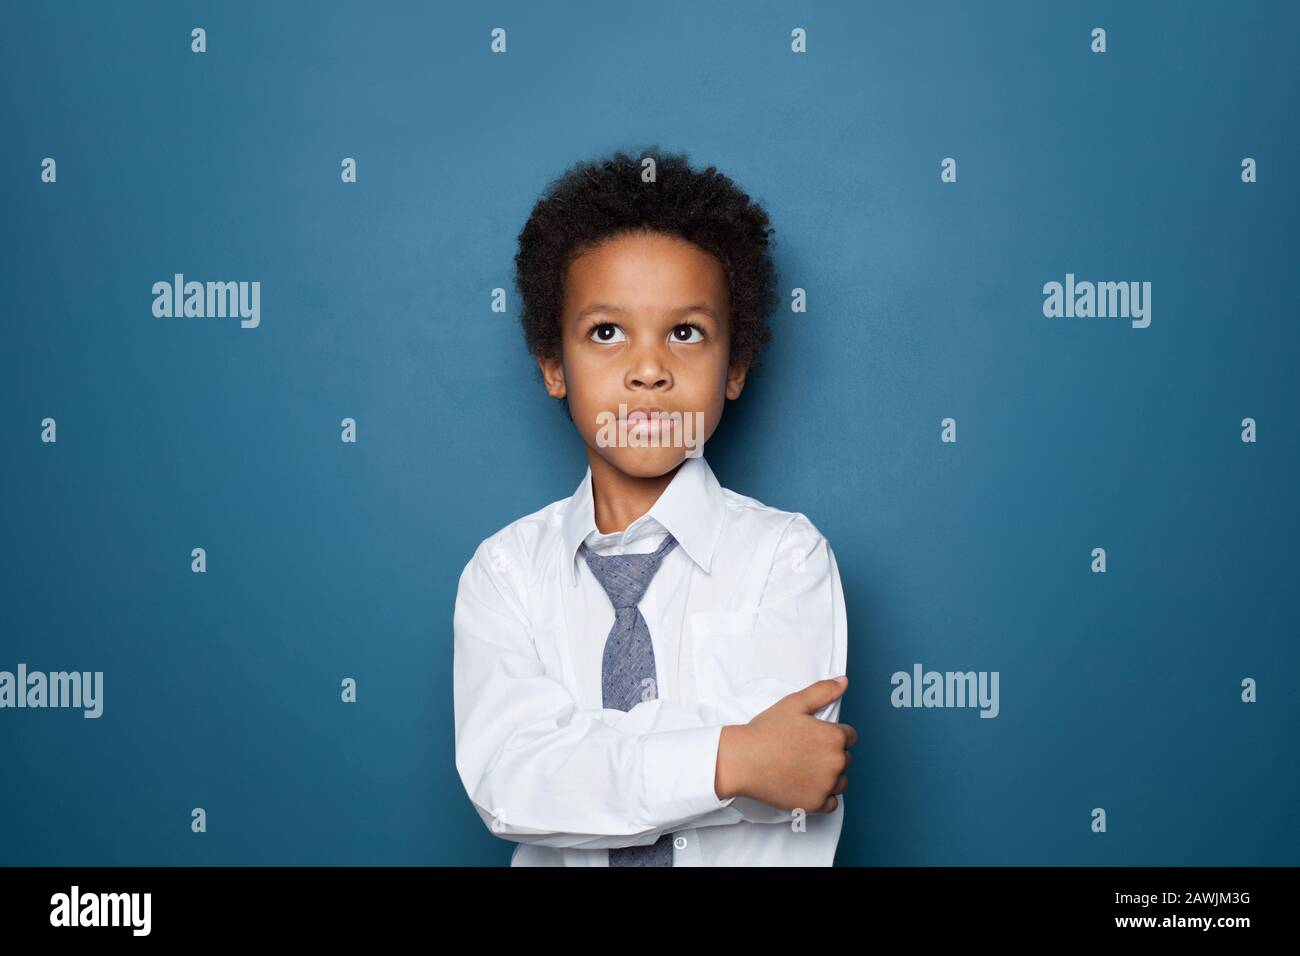 Smart african american kid boy student with crossed arms looking up on blue background. Little black child school boy Stock Photo